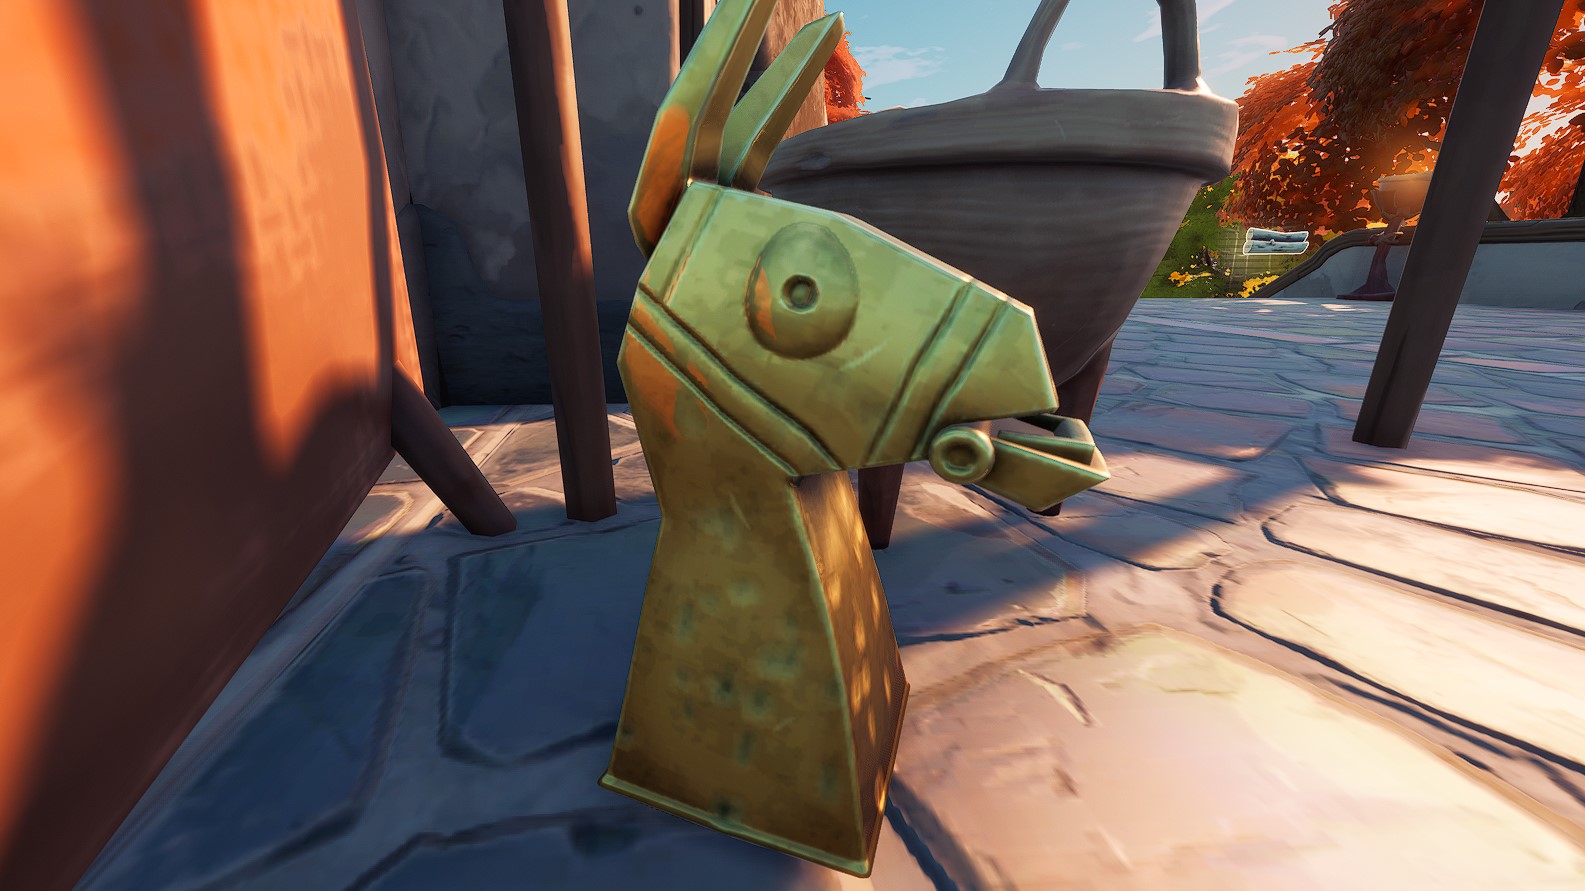  Where to find golden artifacts near the Spire in Fortnite 